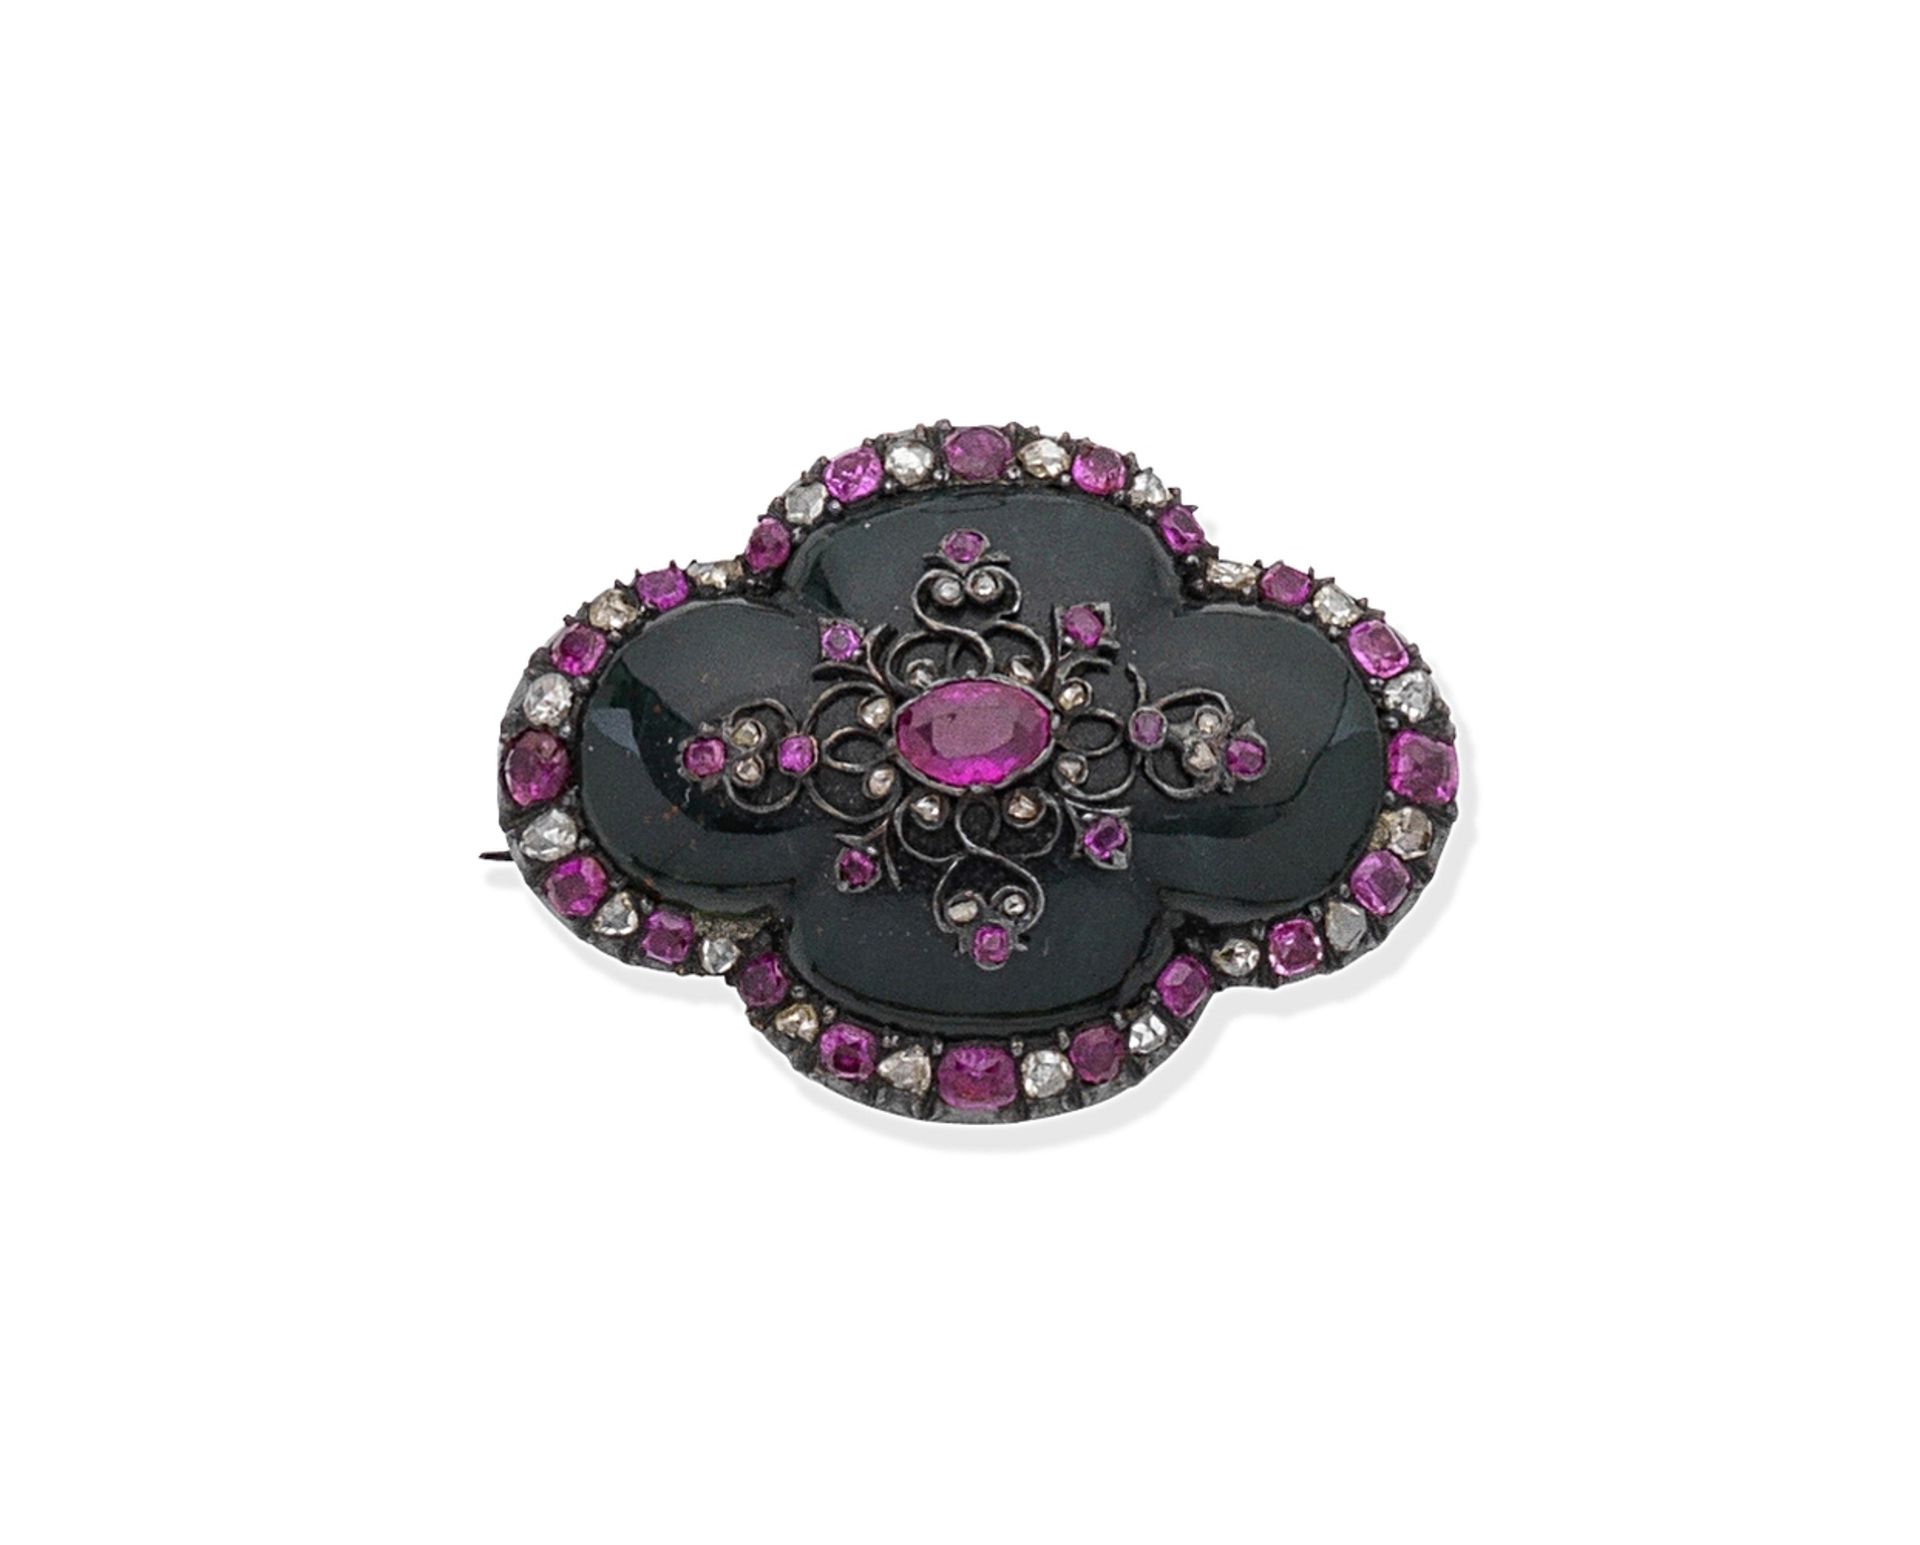 DIAMOND BROOCH AND TWO GEM-SET BROOCH/PENDANTS, SECOND HALF OF THE 19TH CENTURY (3) - Image 3 of 3